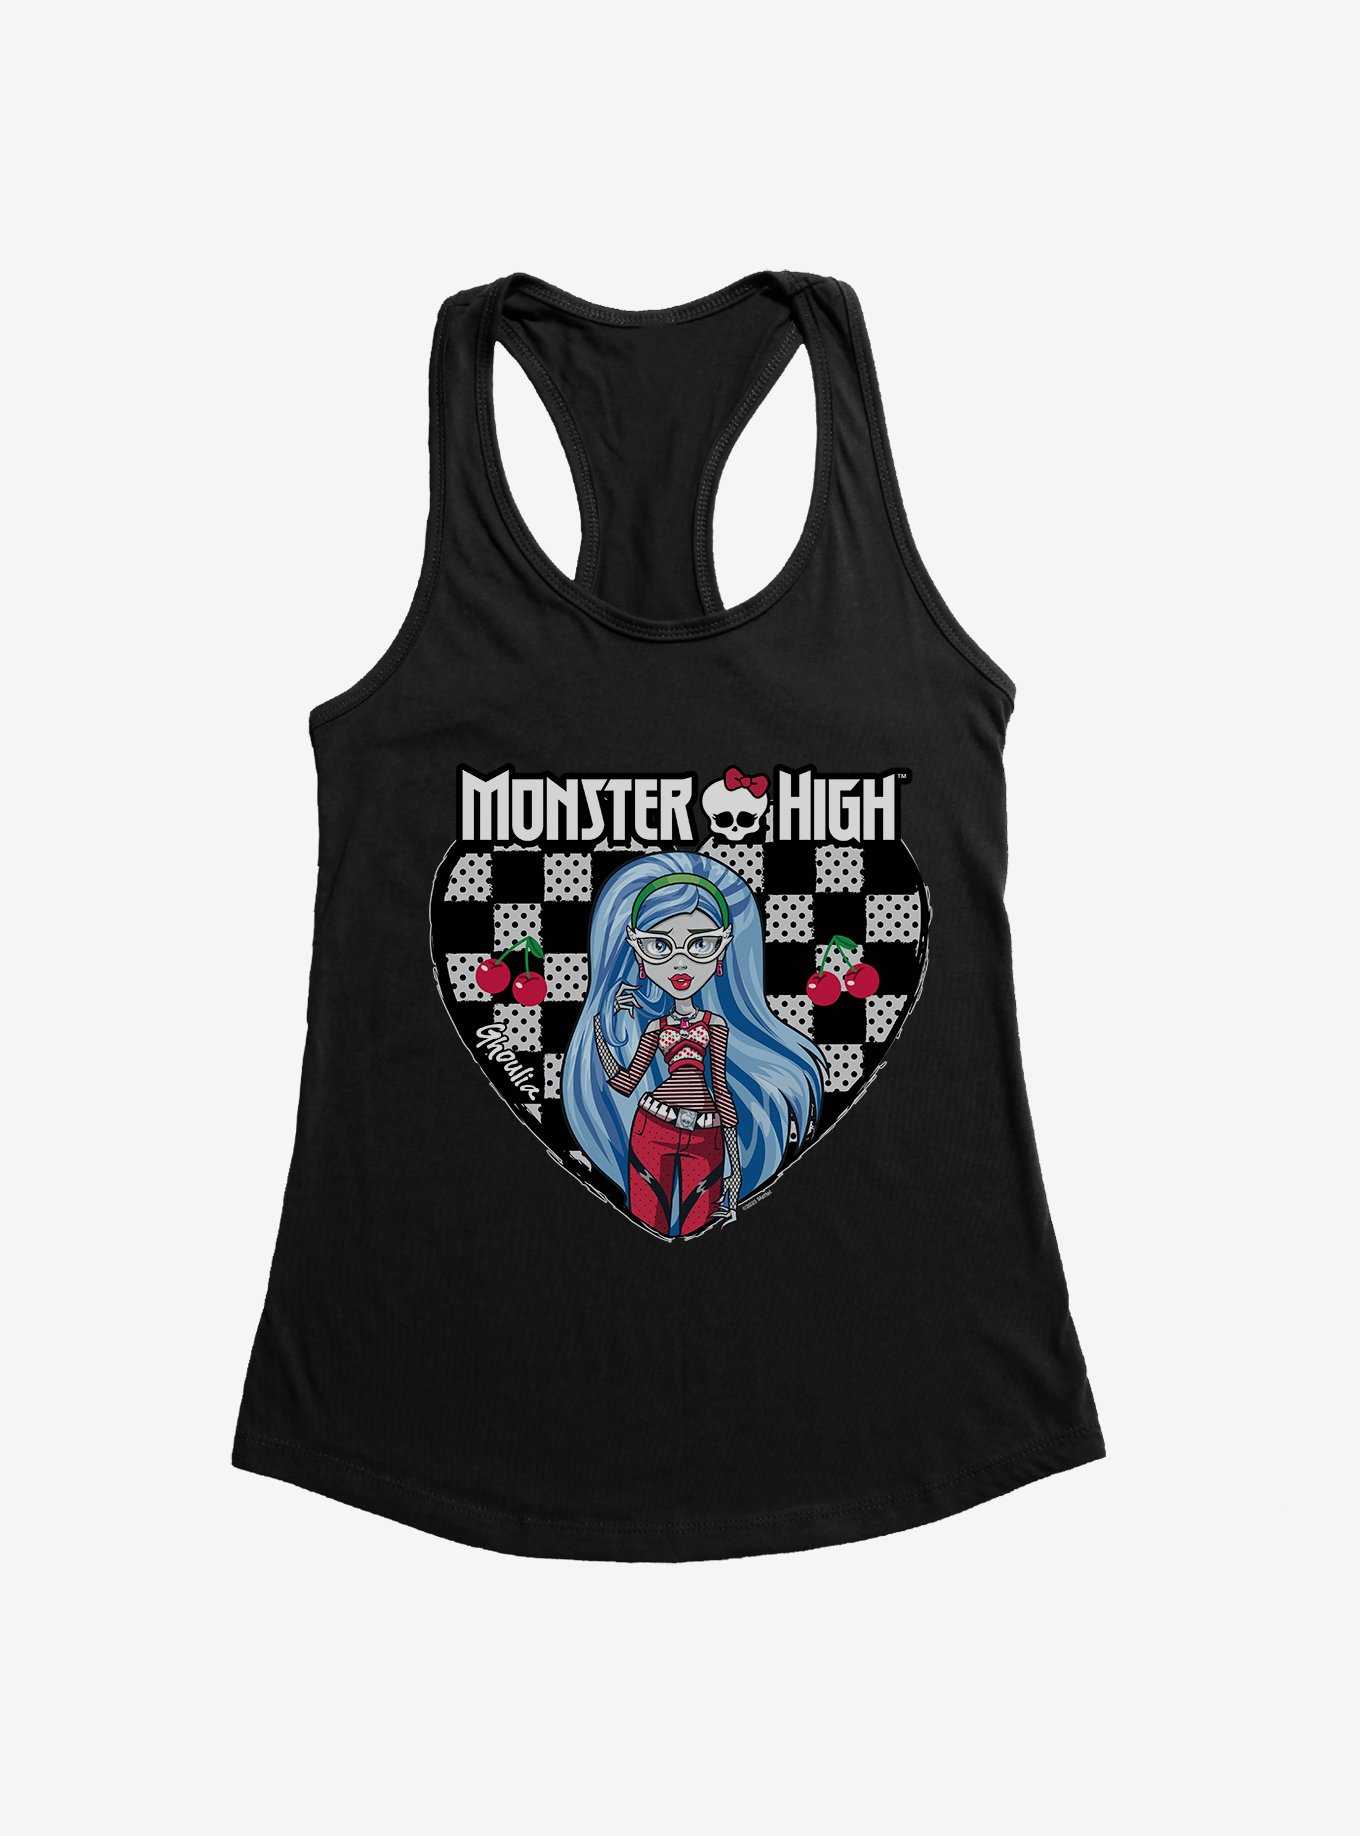 Monster High Ghoulia Yelps Checkerboard Heart Girls Tank, , hi-res